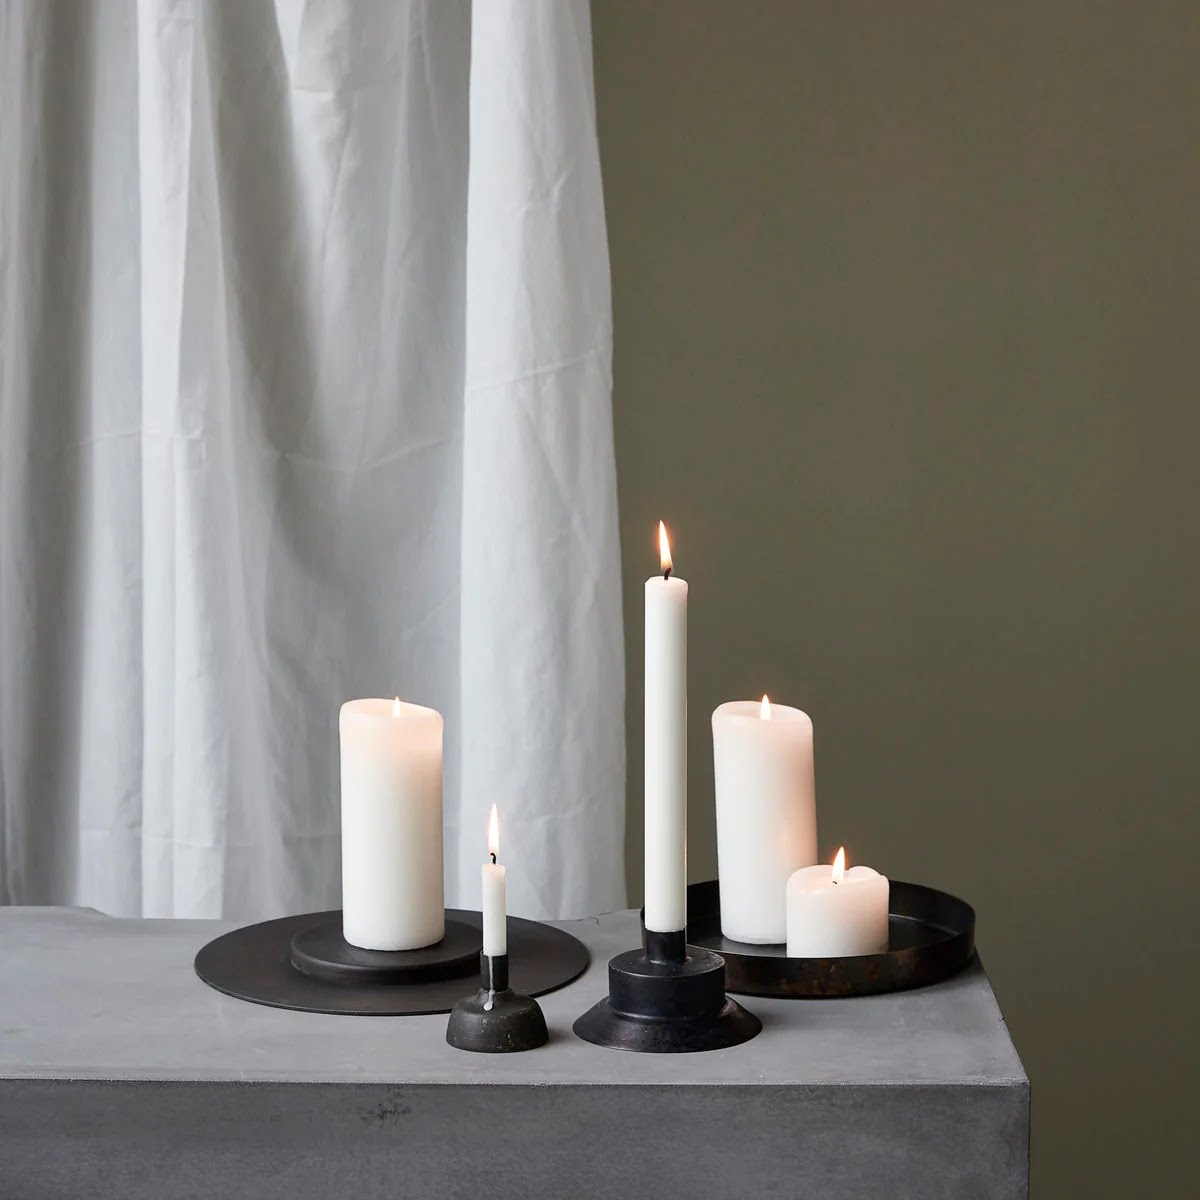 Industry + Co., Candle Stand, €24.50